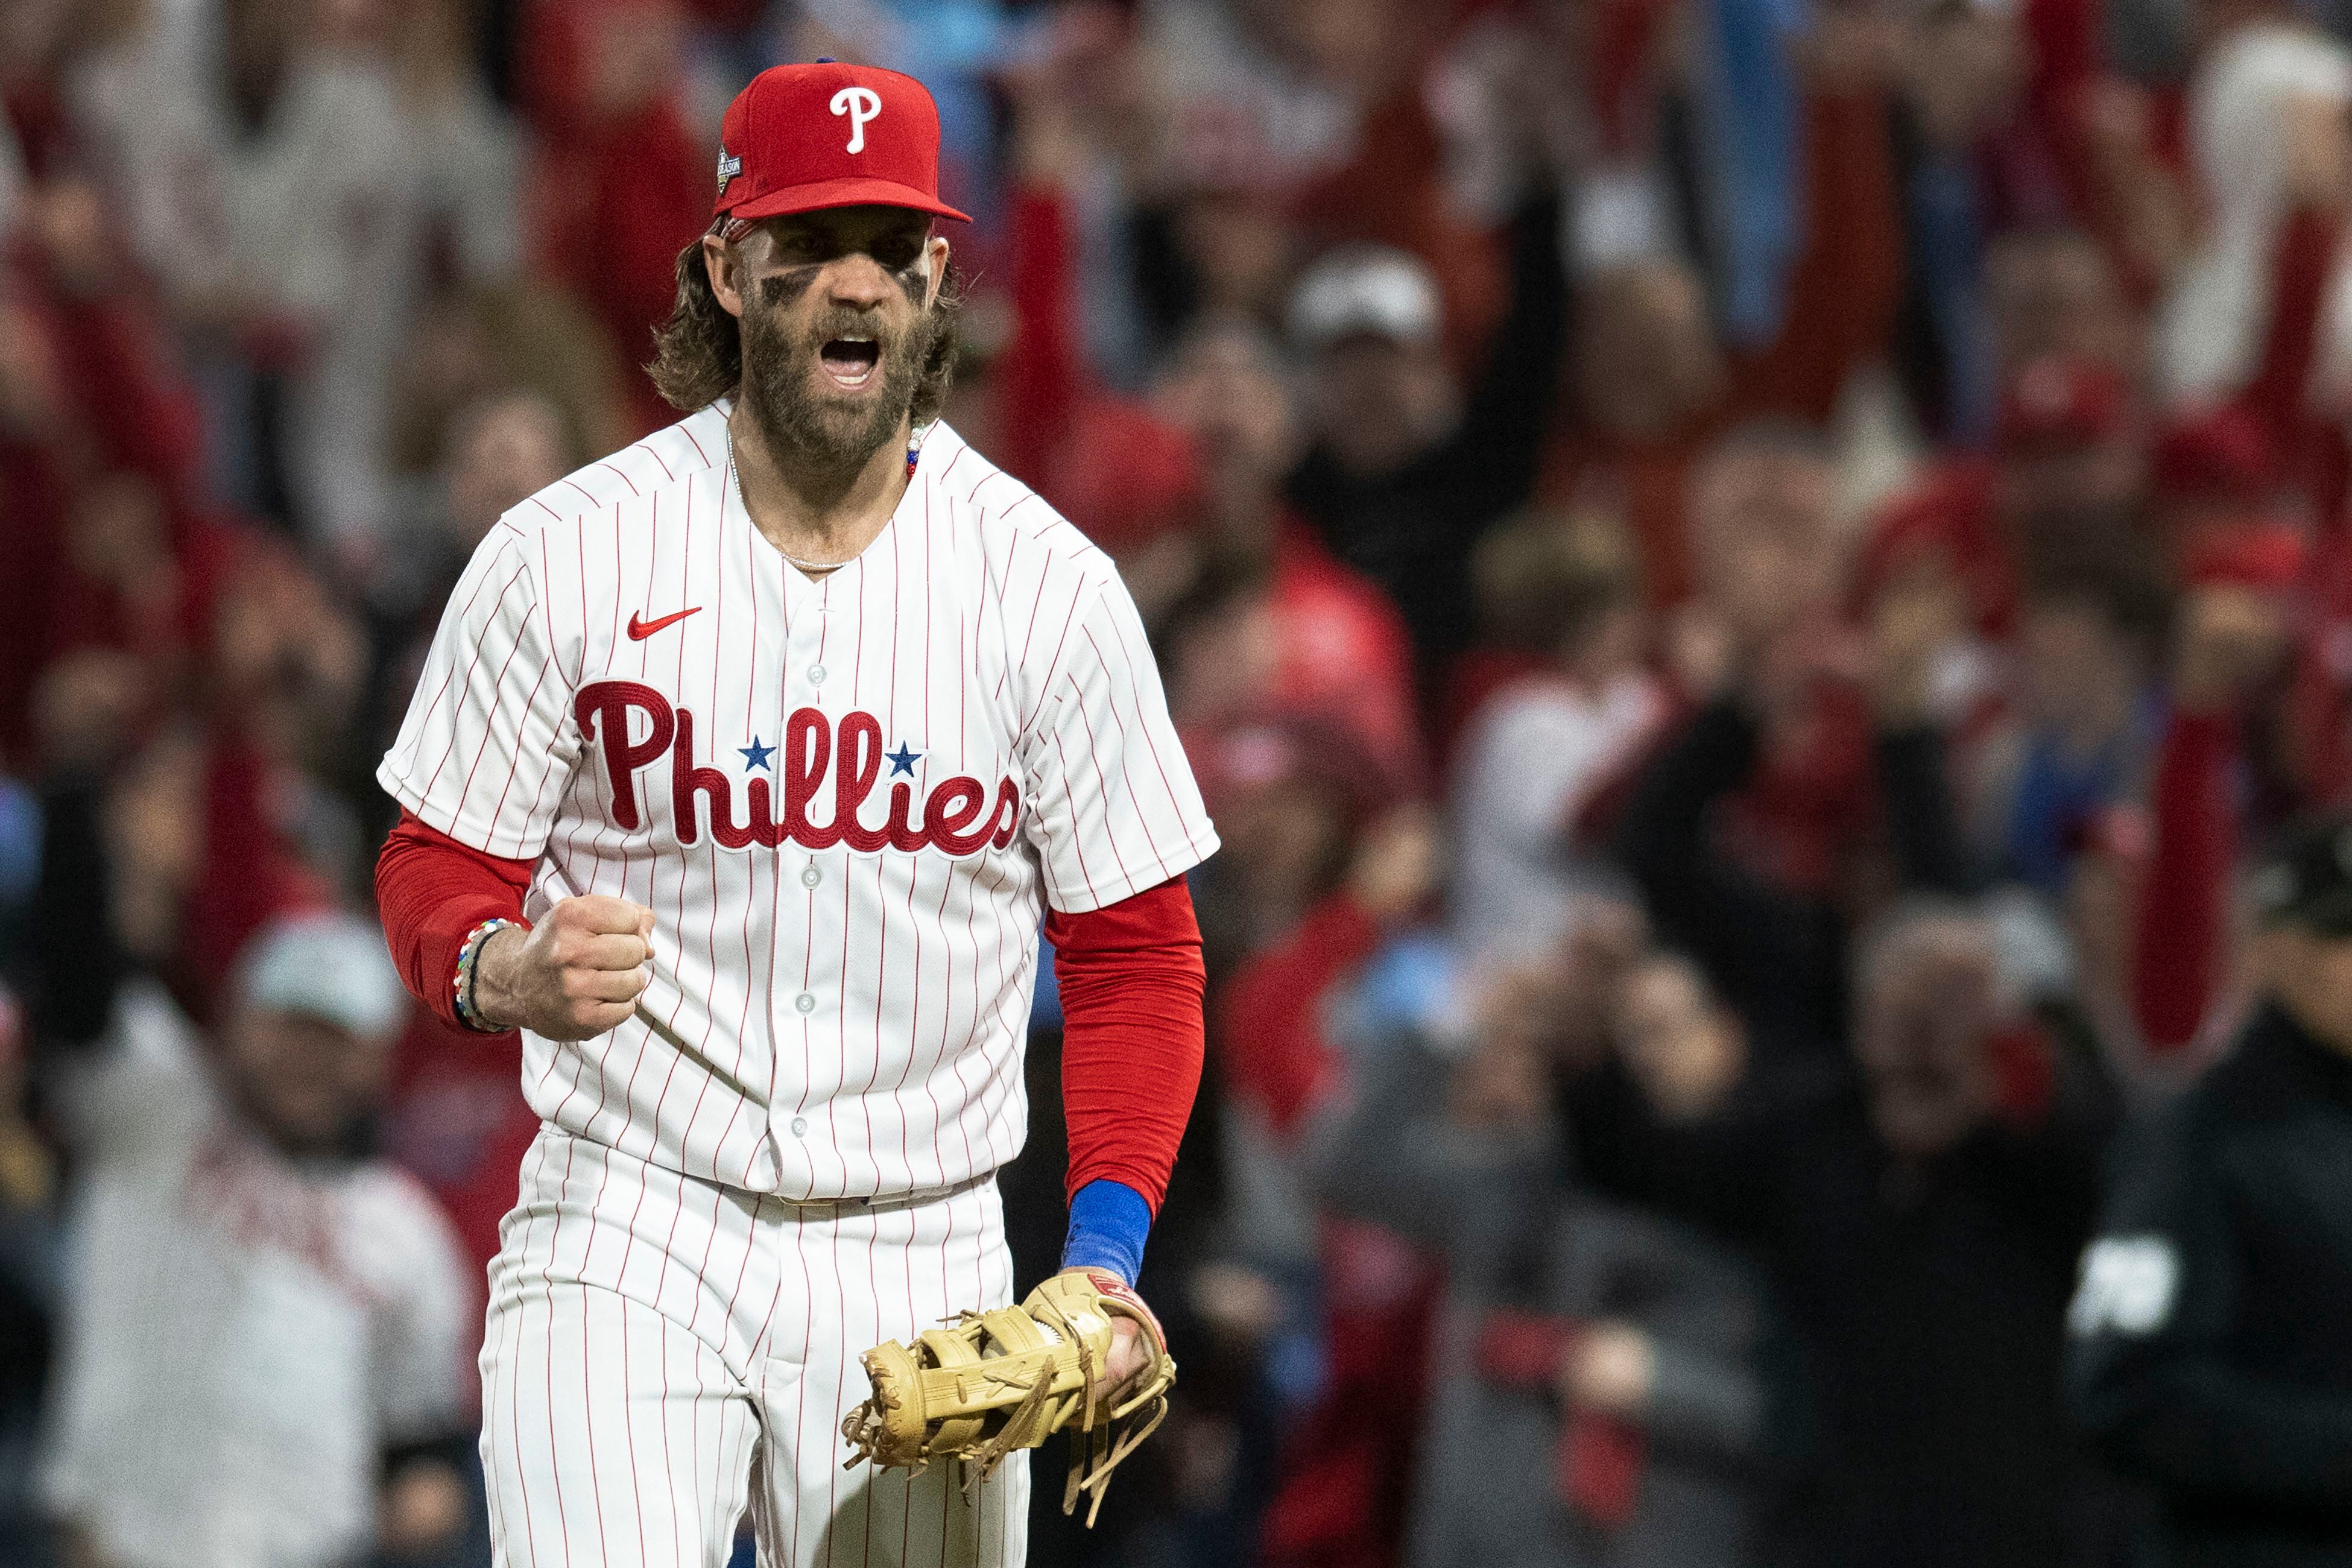 Bryce Harper wears Kelly green Eagles jersey to Phillies game